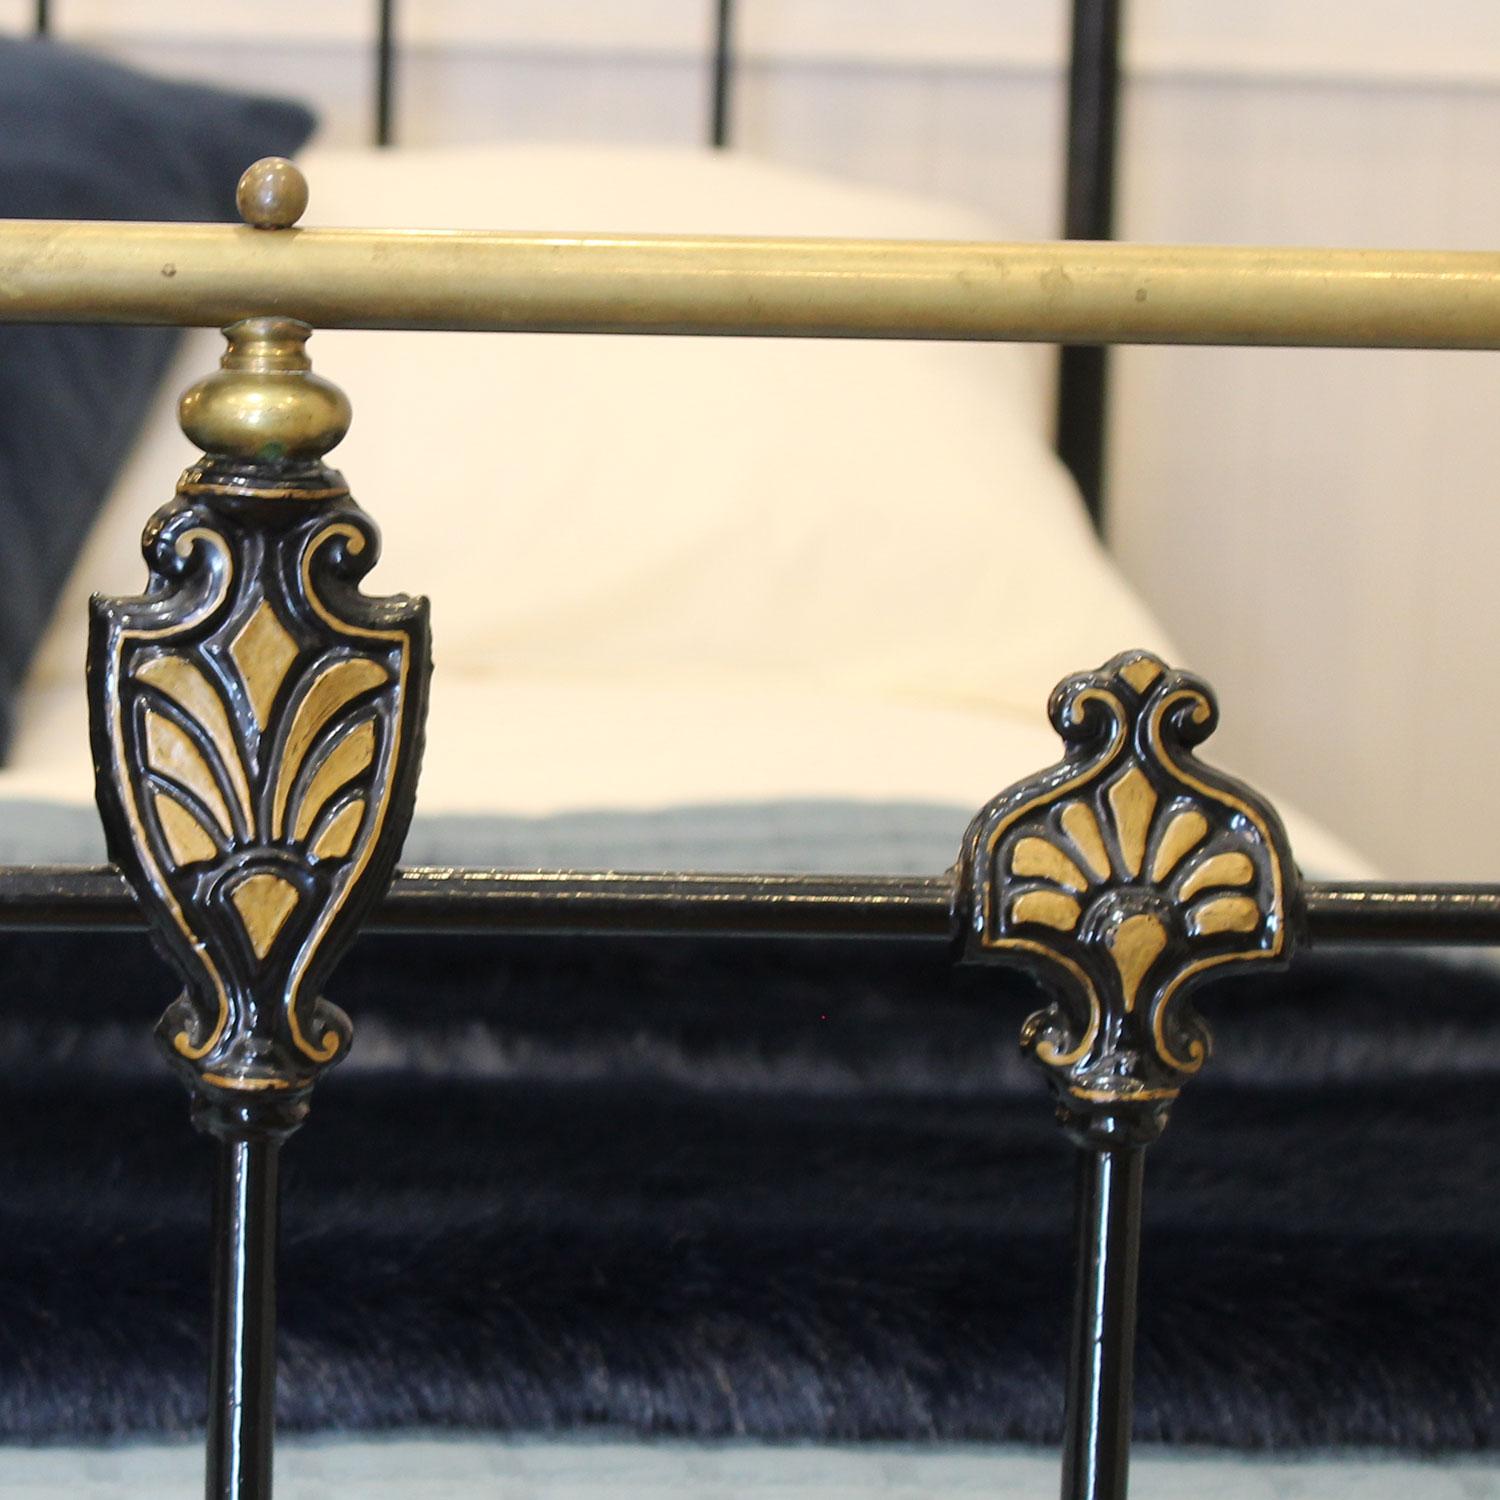 Double Brass & Iron Bed in Black, MD126 2